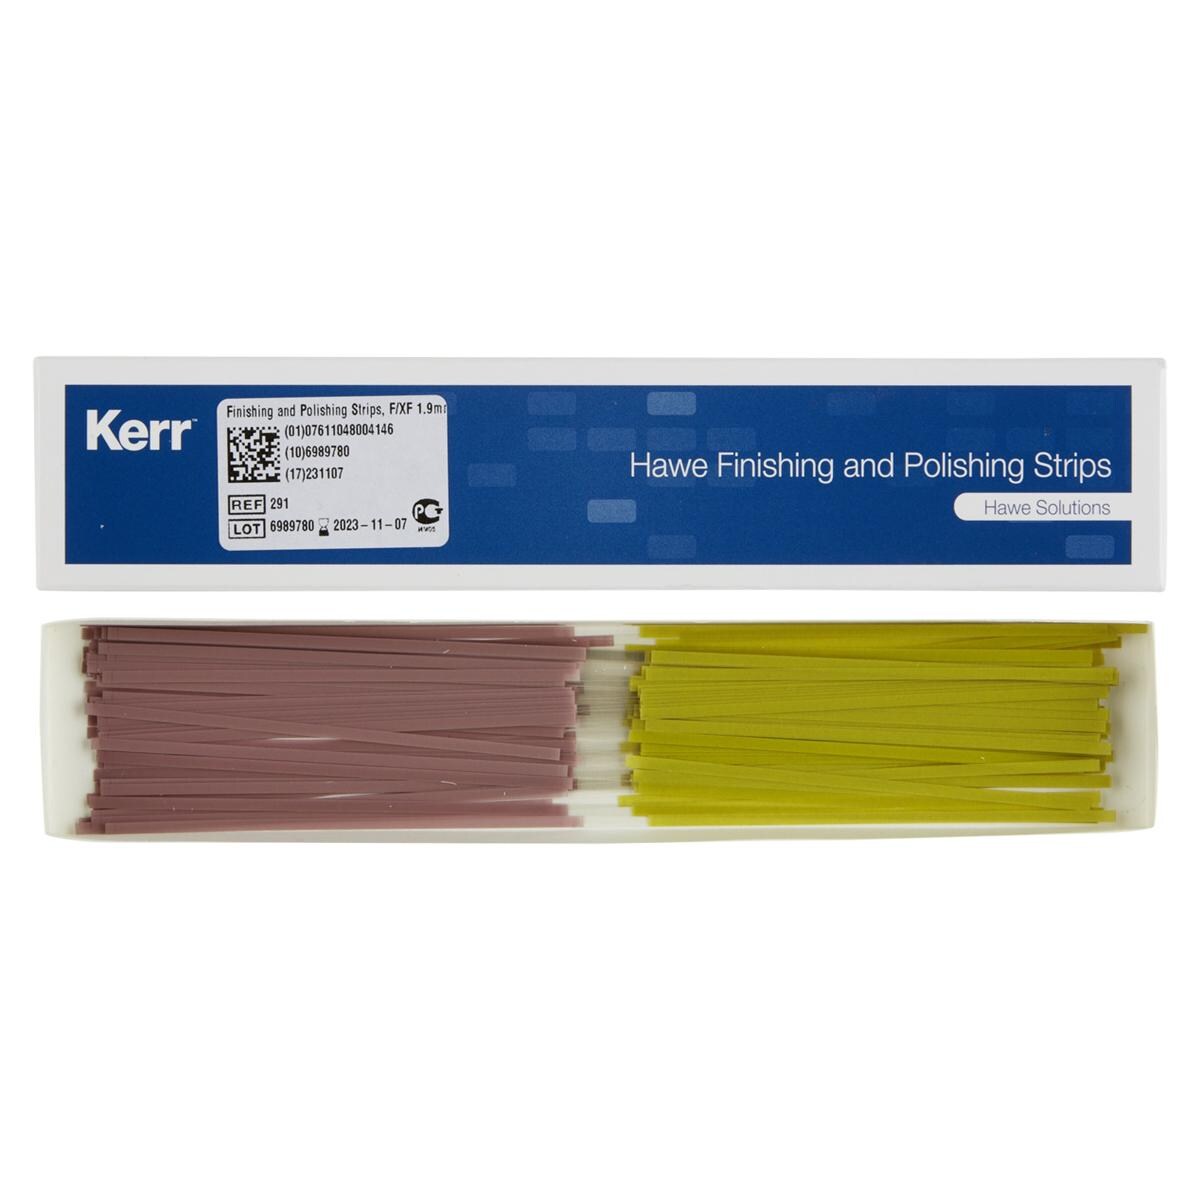 Hawe Finishing and Polishing Strips - largeur 1,9 mm, fin/extra-fin, jaune/rose